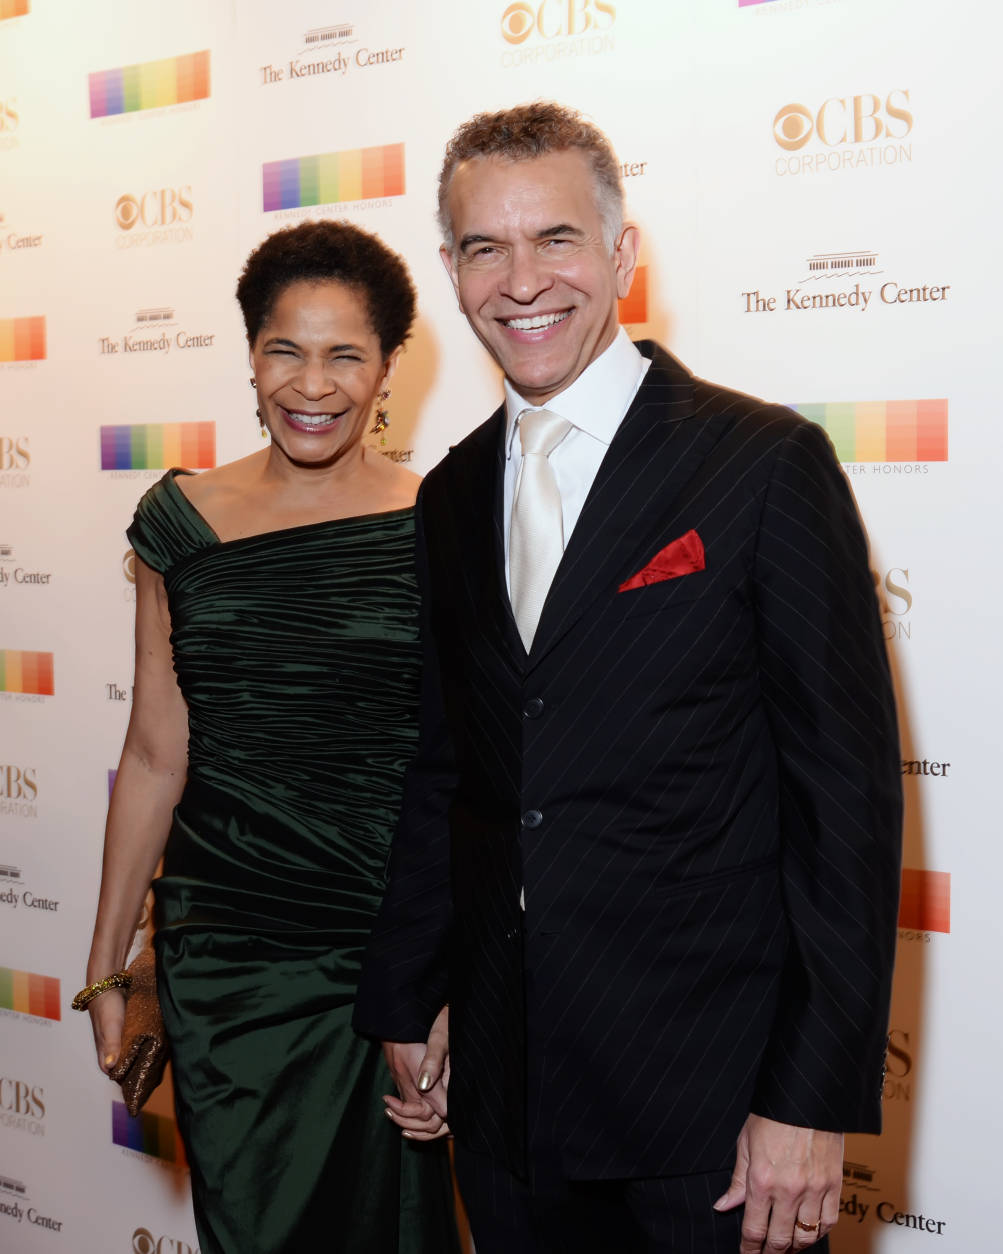 Actor/singer Brian Stokes Mitchell and his wife Allyson Tucker. (Courtesy Shannon Finney, <a href="http://www.shannonfinneyphotography.com">www.shannonfinneyphotography.com</a>)